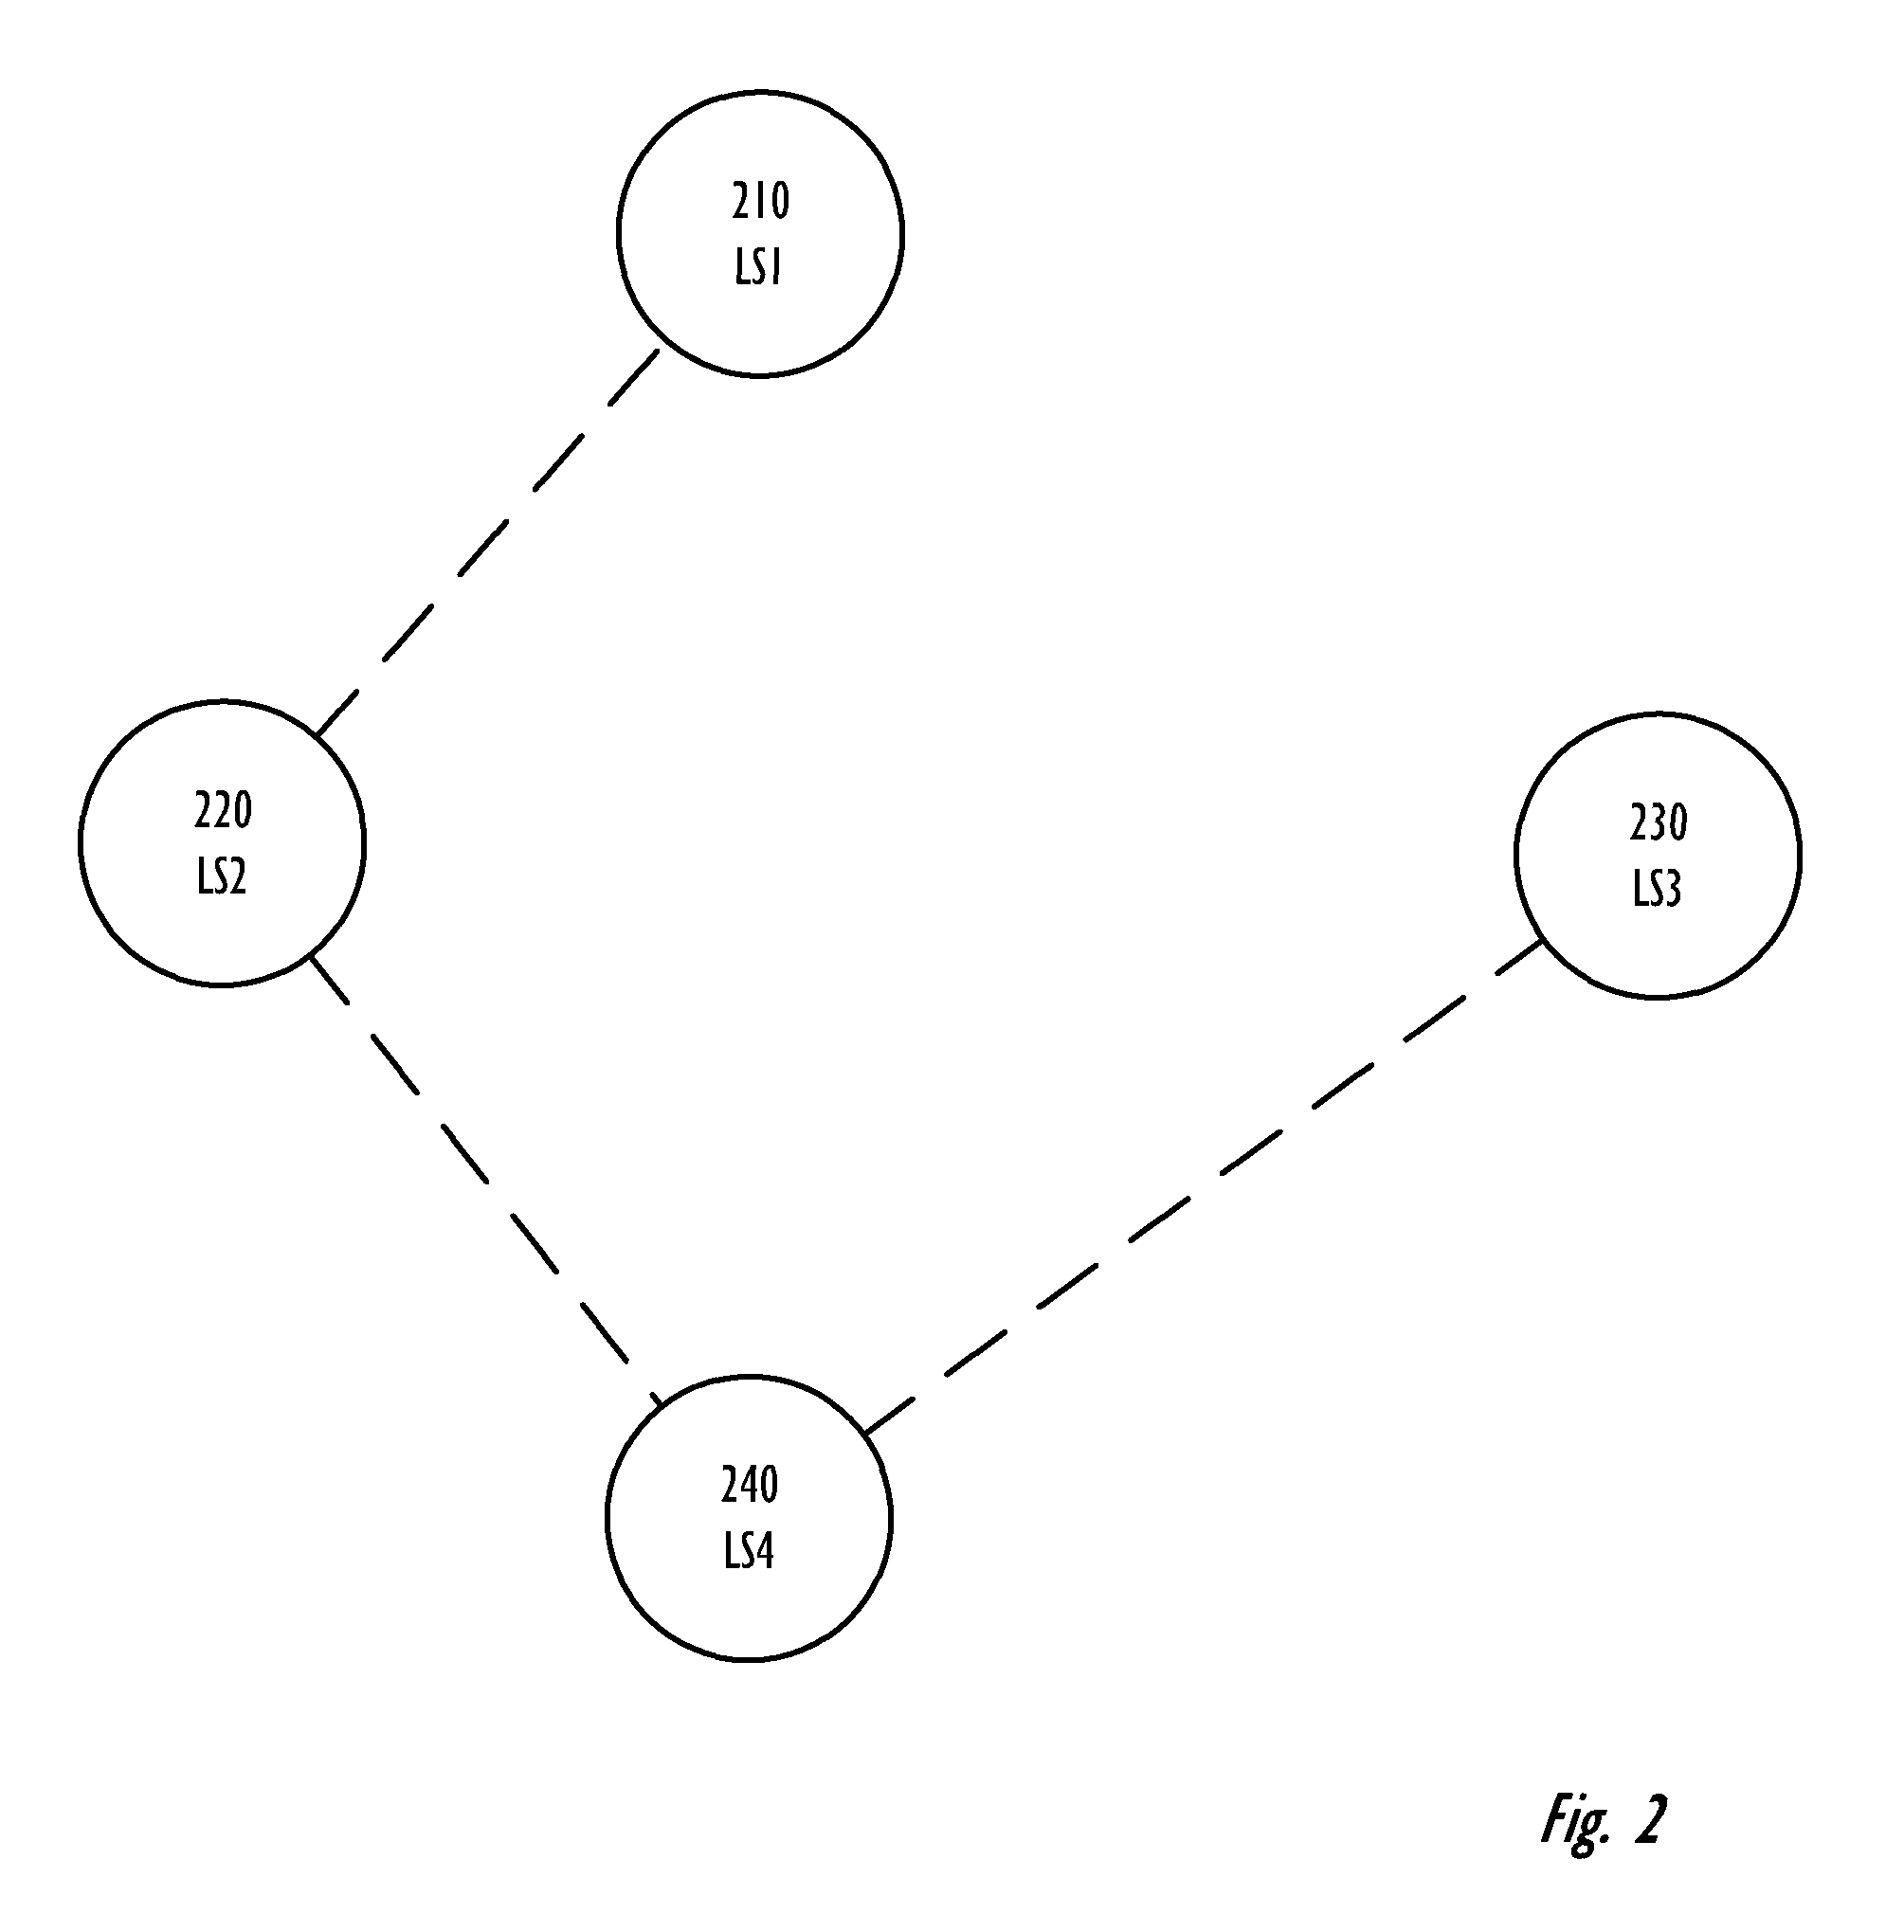 Defining an optimal topology for a group of logical switches